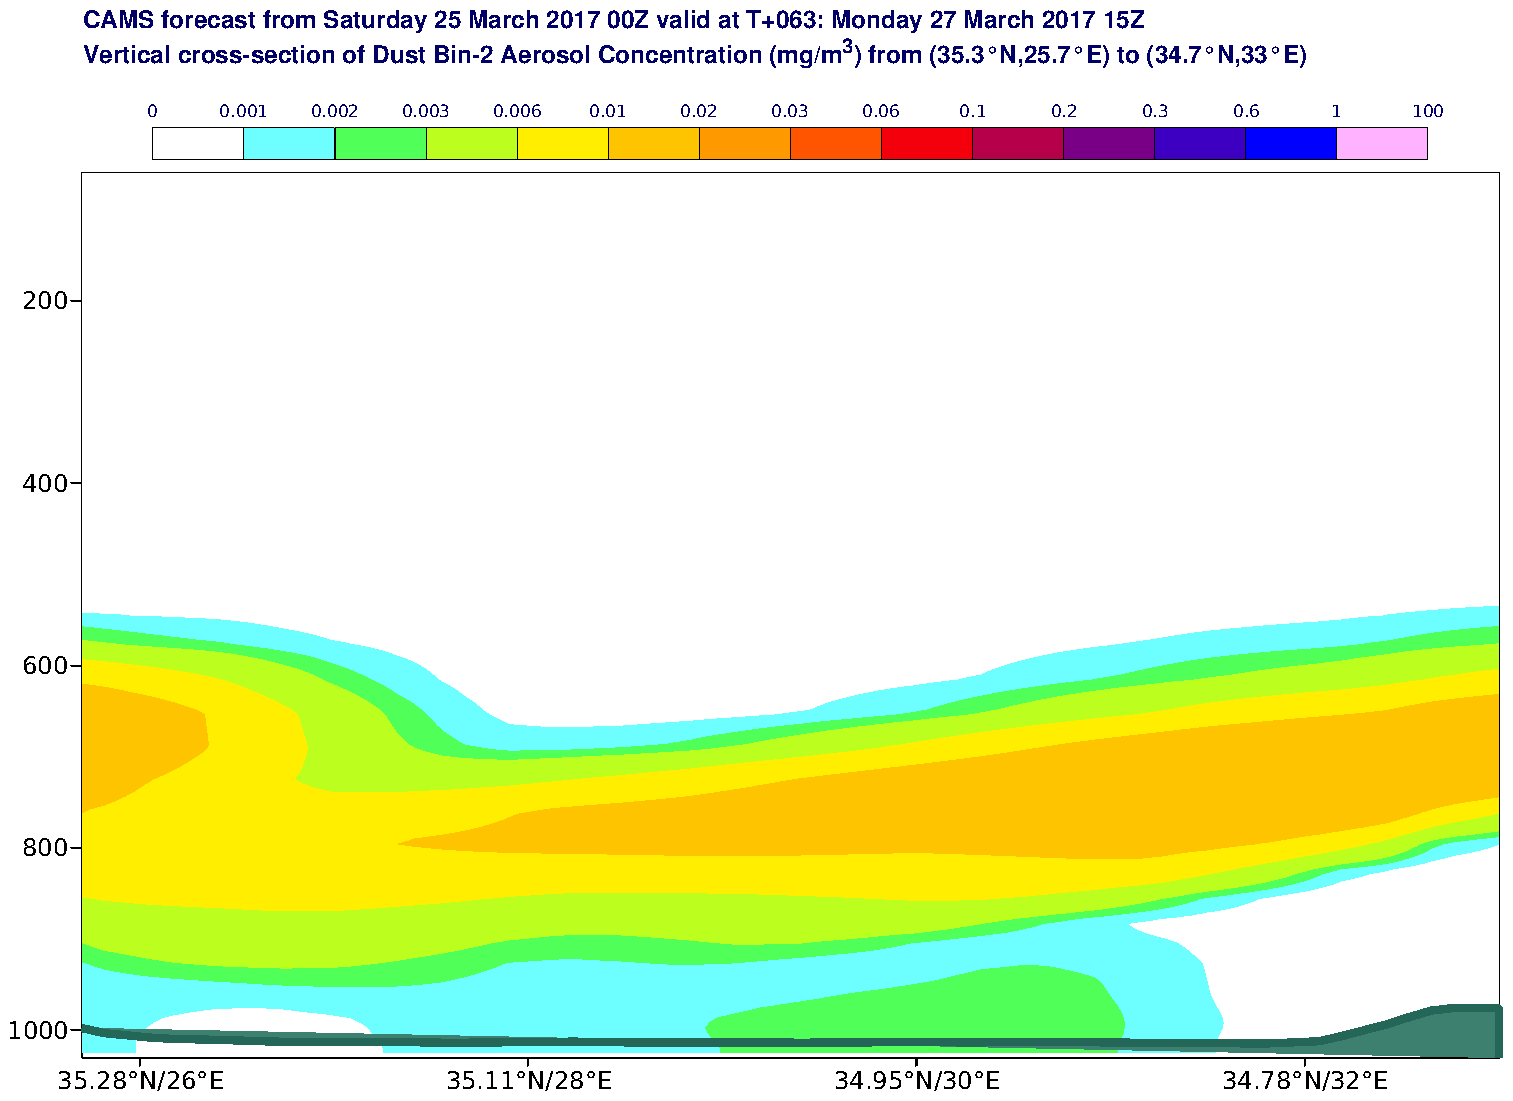 Vertical cross-section of Dust Bin-2 Aerosol Concentration (mg/m3) valid at T63 - 2017-03-27 15:00